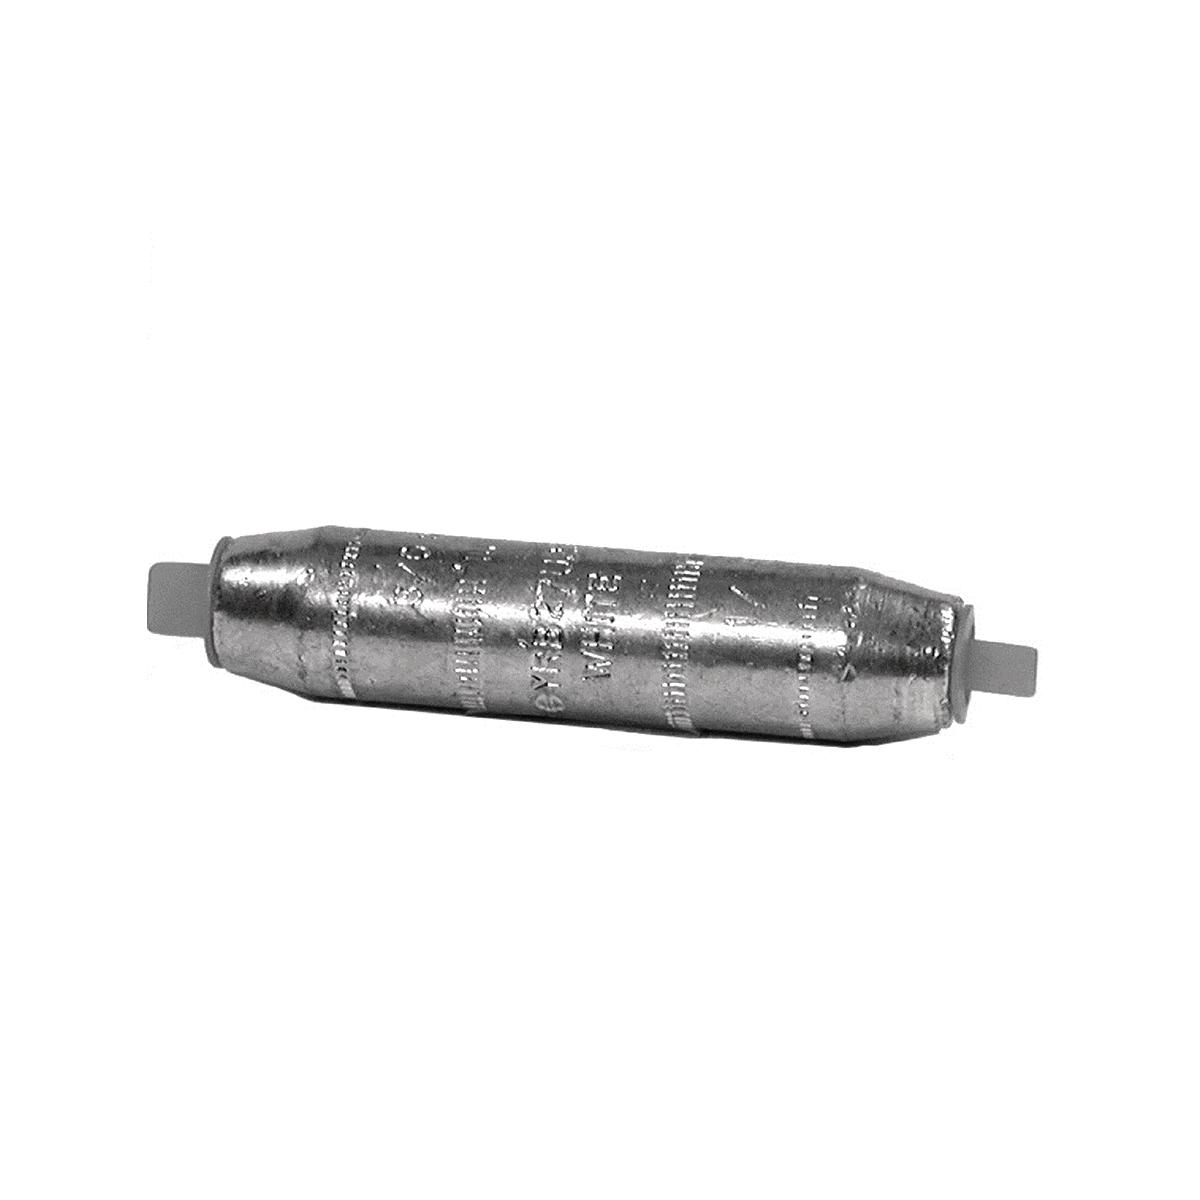 Hubbell YRB34U32 Aluminum Electro tin plated reducer. 